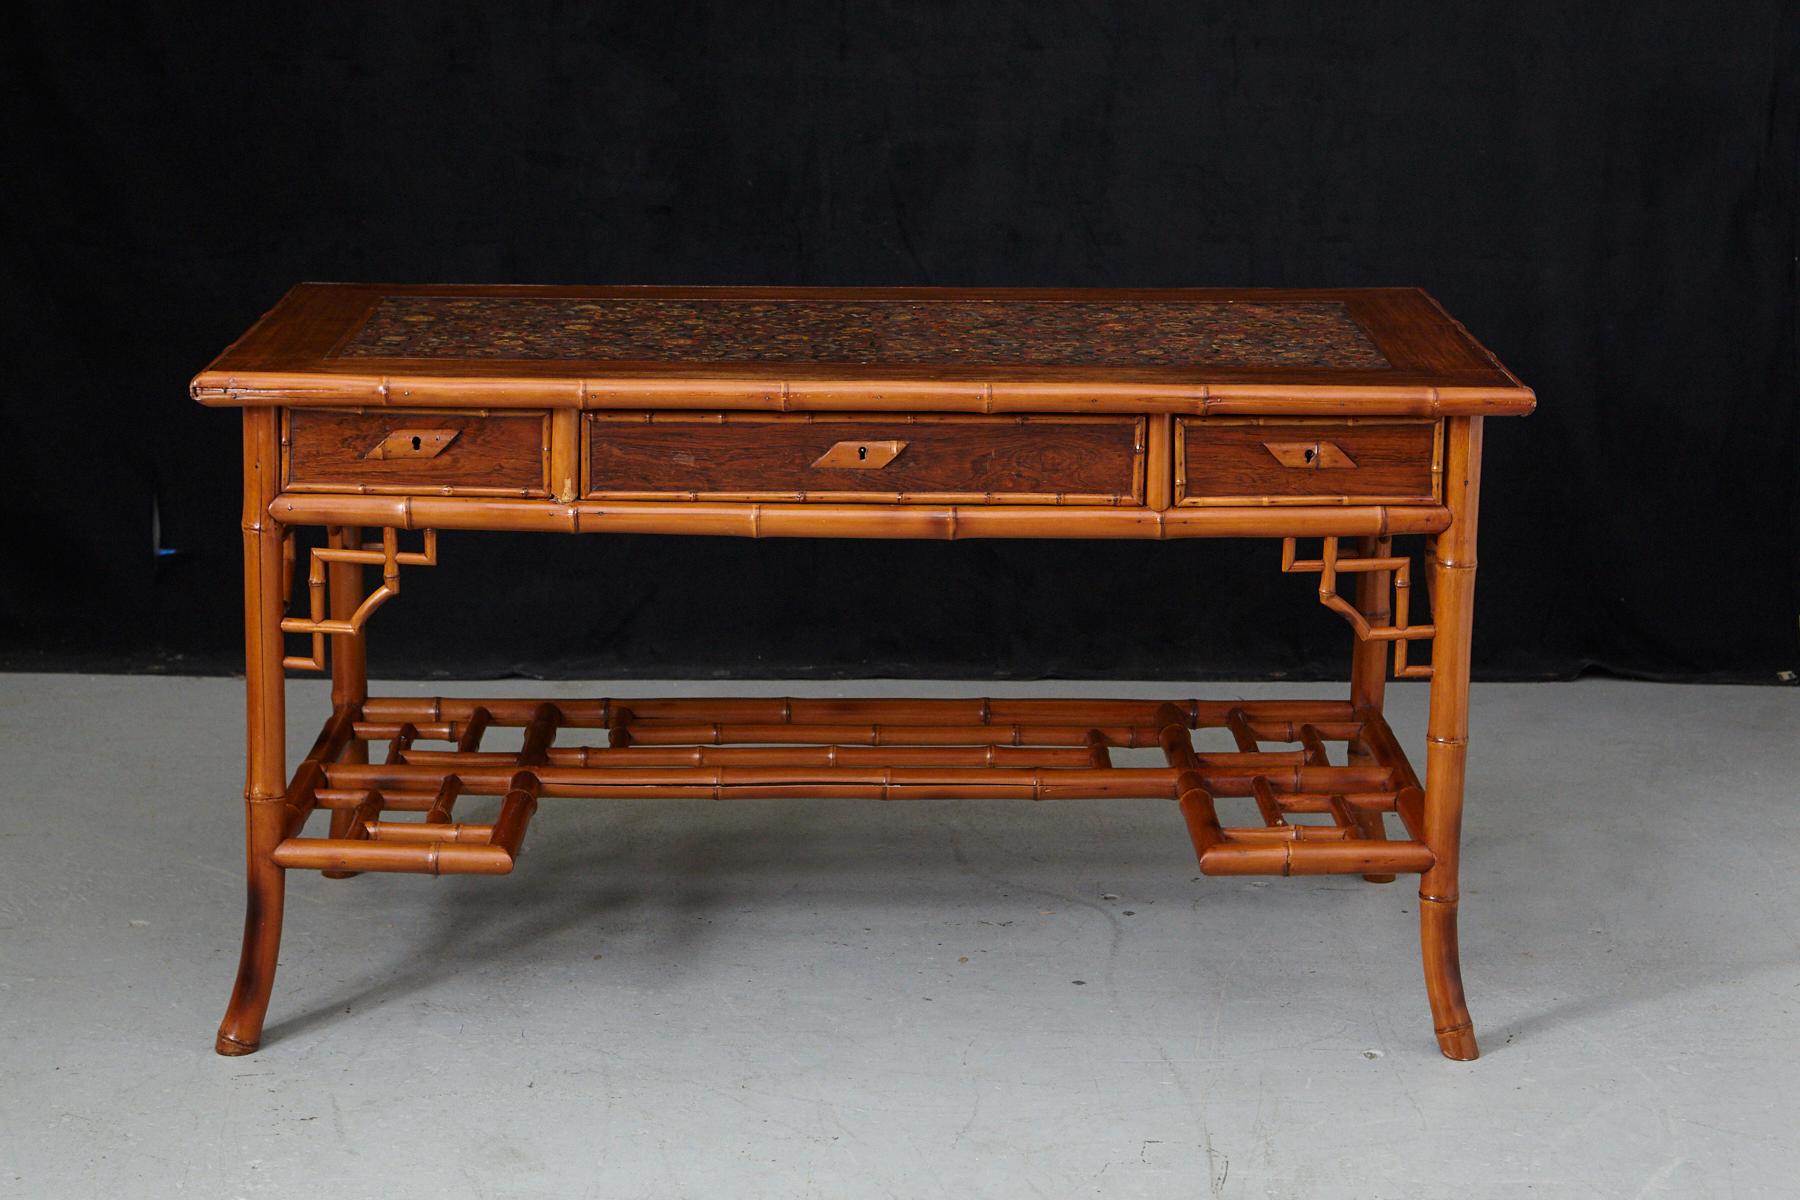 Early 20th century French bamboo desk with wooden lacquered top and leather inset
and three drawers and a low integrate shelf, circa 1920s.
The table is in a very good vintage condition, there are some cracks in the bamboo, which doesn't have any